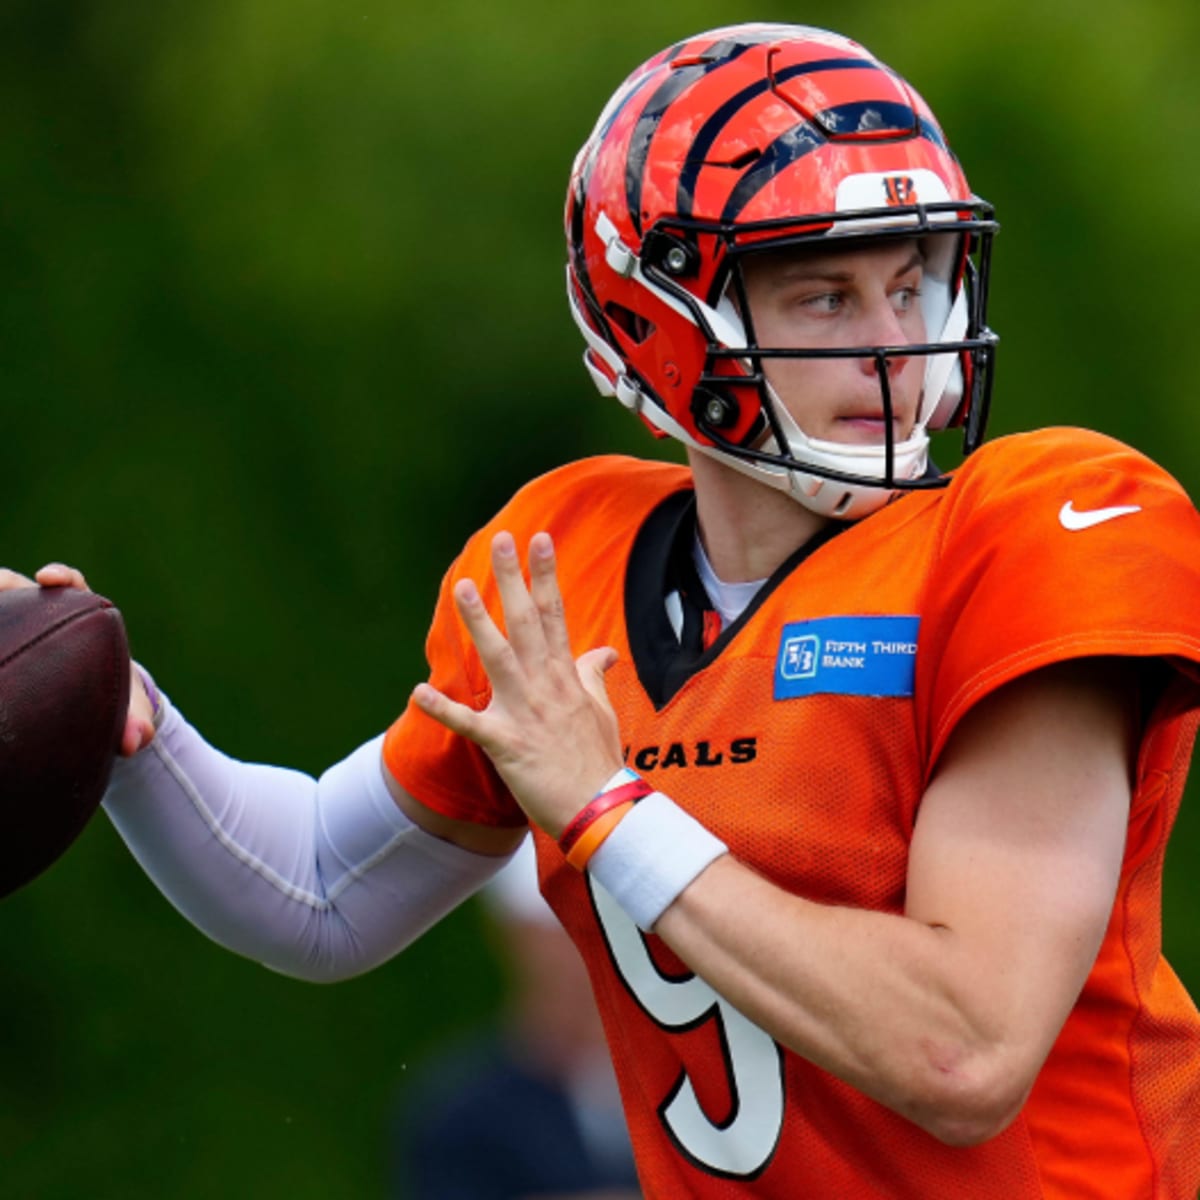 Bengals Joe Burrow has a New Look That is Straight Out of the 80s